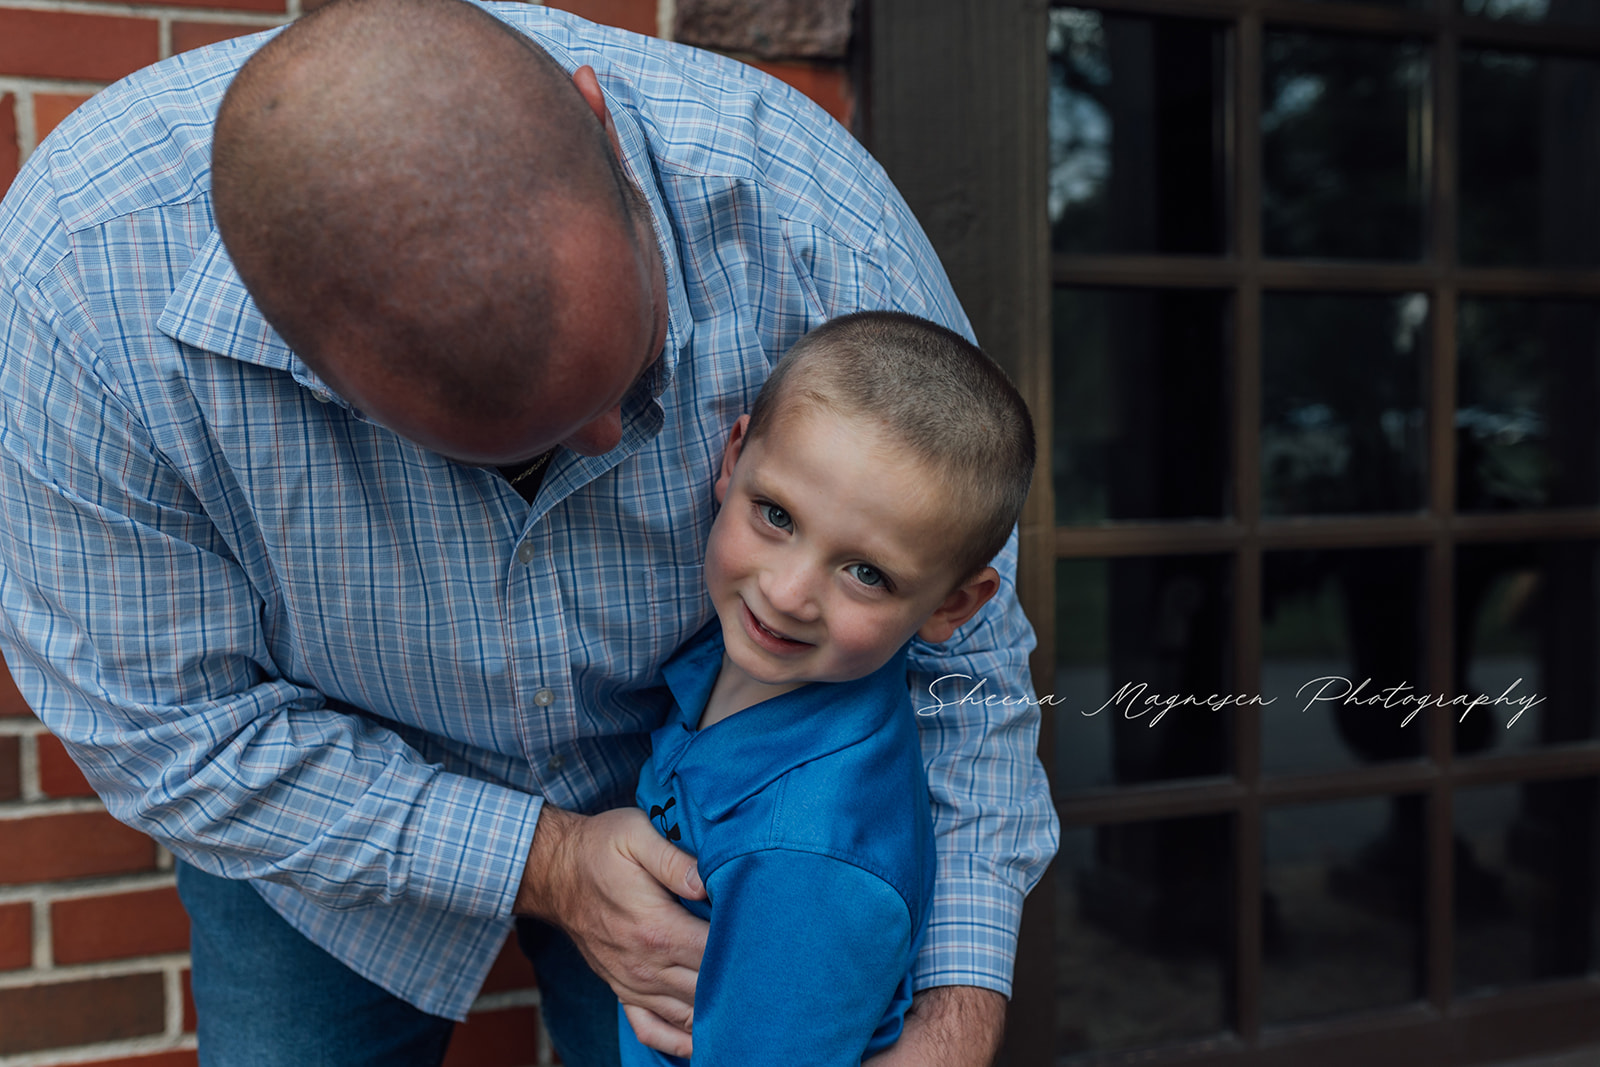 Outdoor family session near Naperville, IL with a dad, mom, two sons and one year old daughter at an old estate.